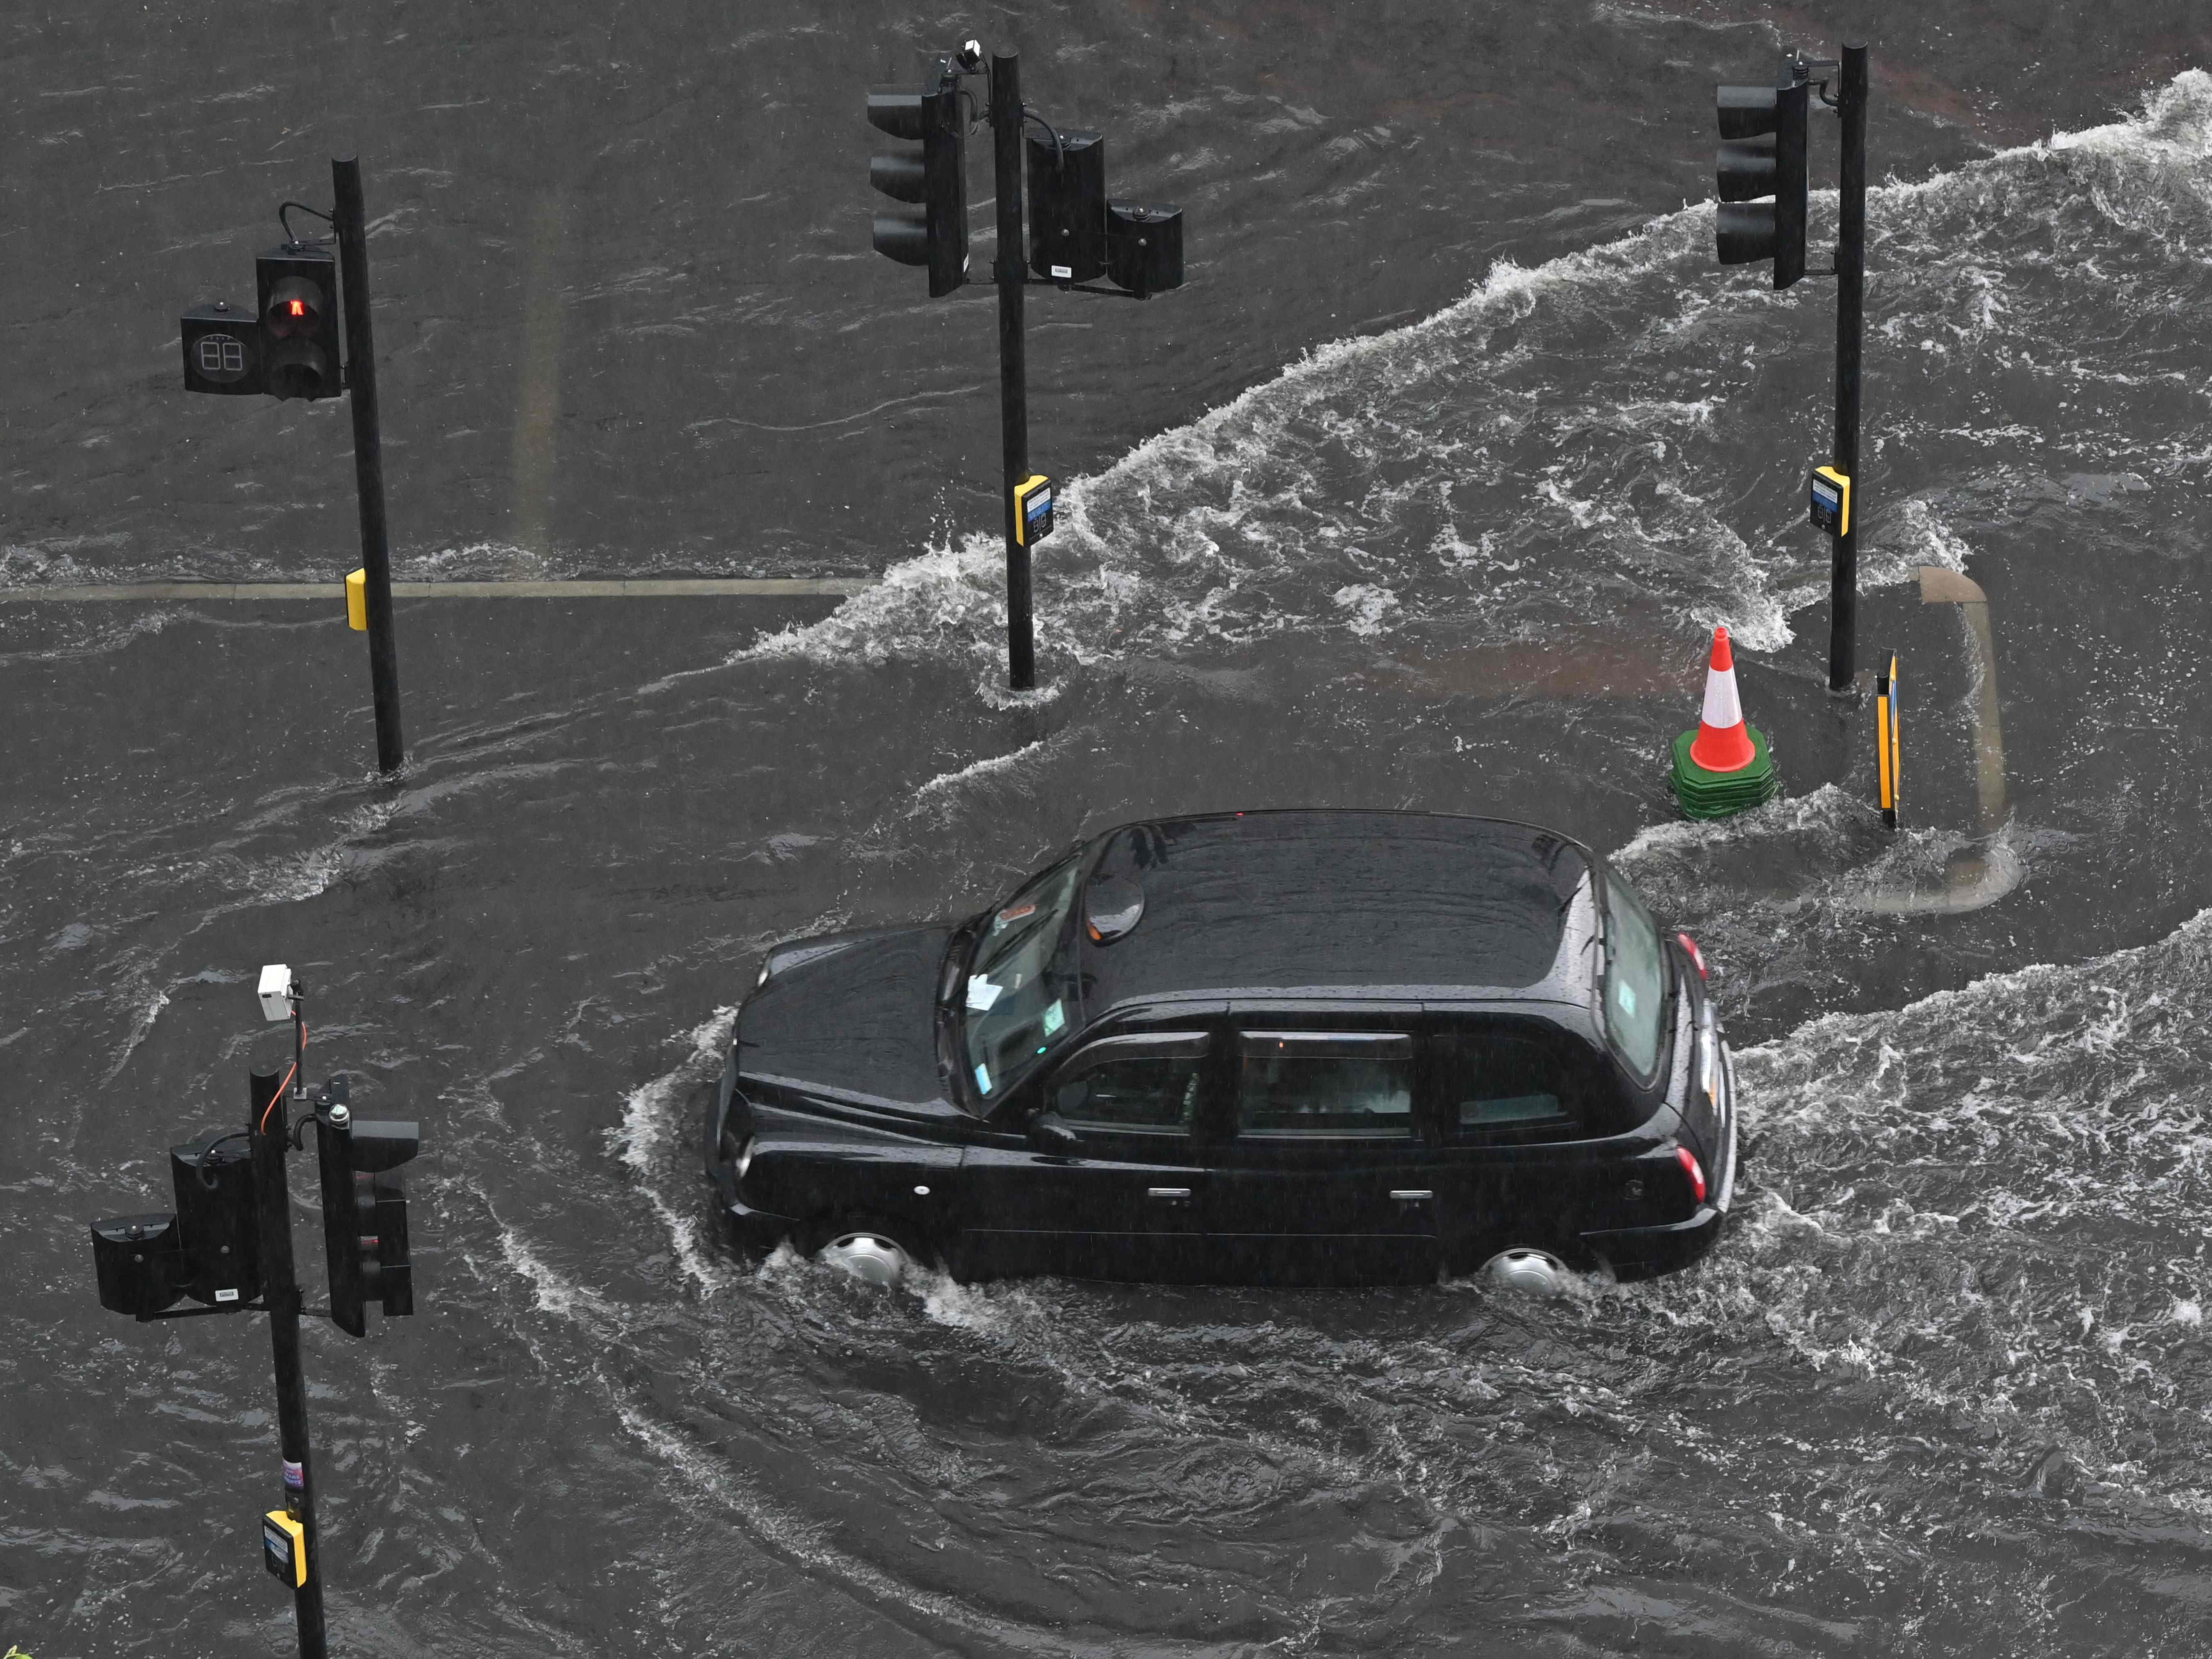 A London taxi drives through water during flash floods in July